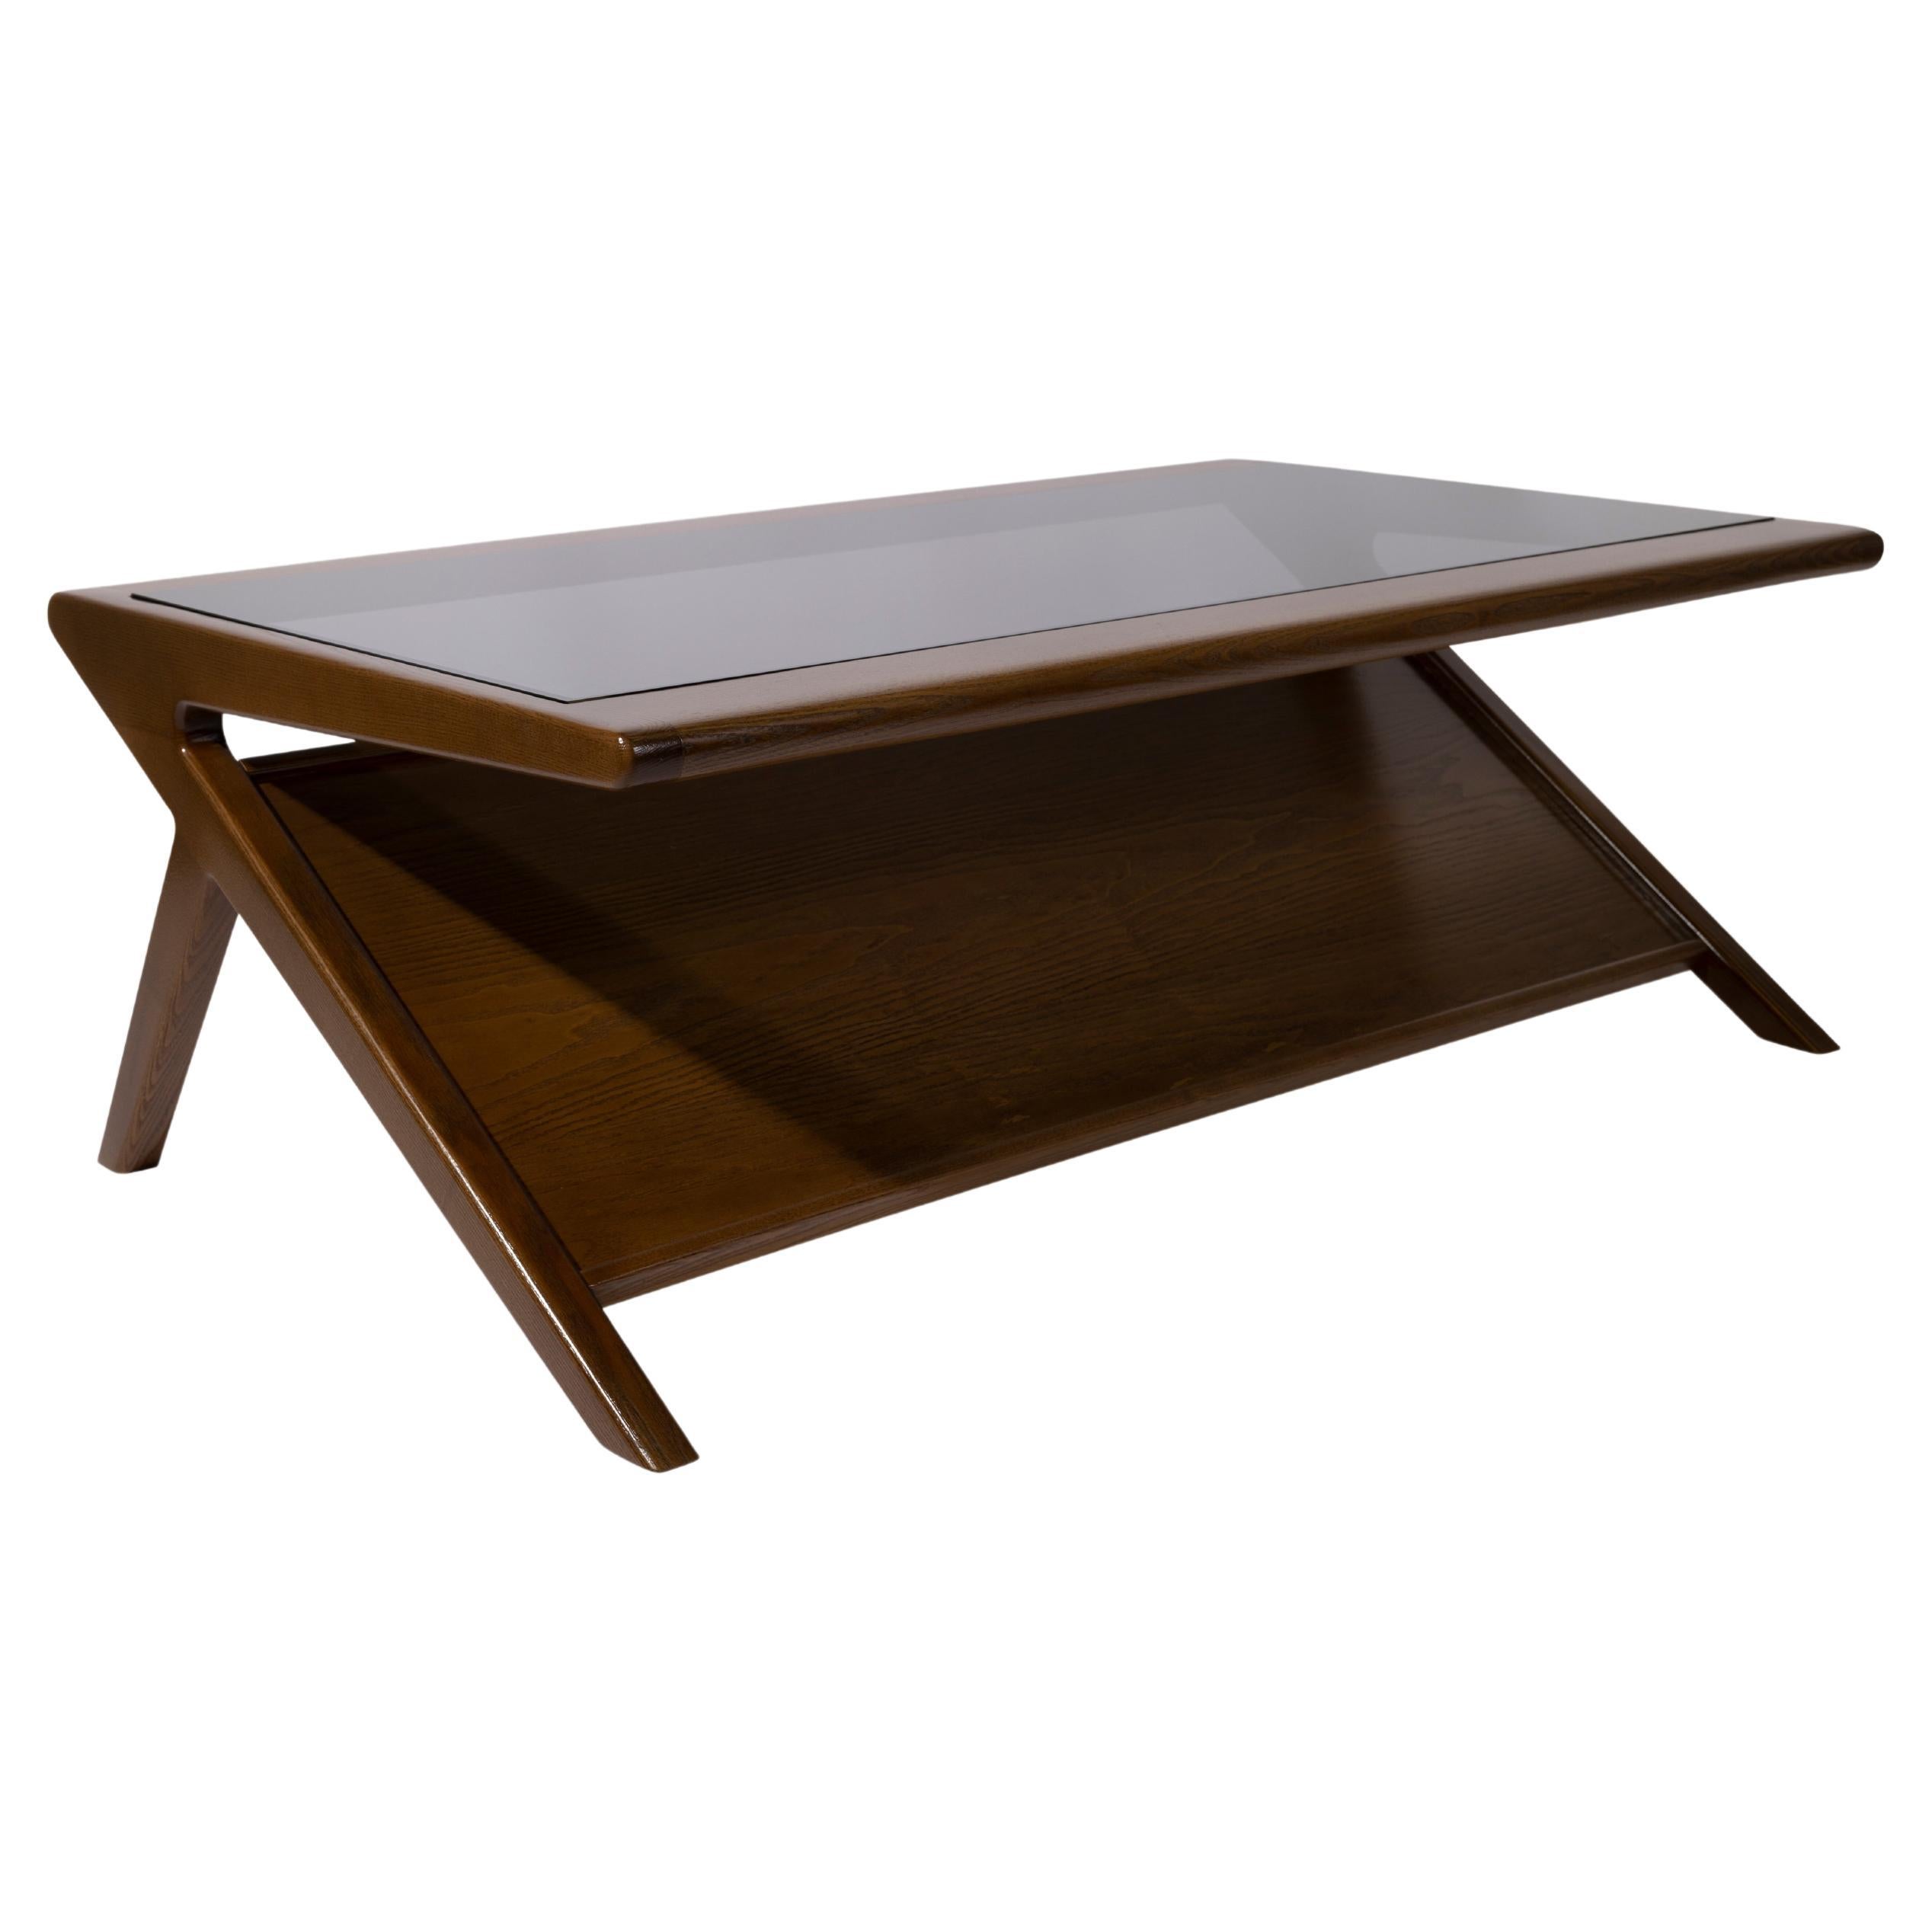 Arden Wood Brown Coffee Table with Glass